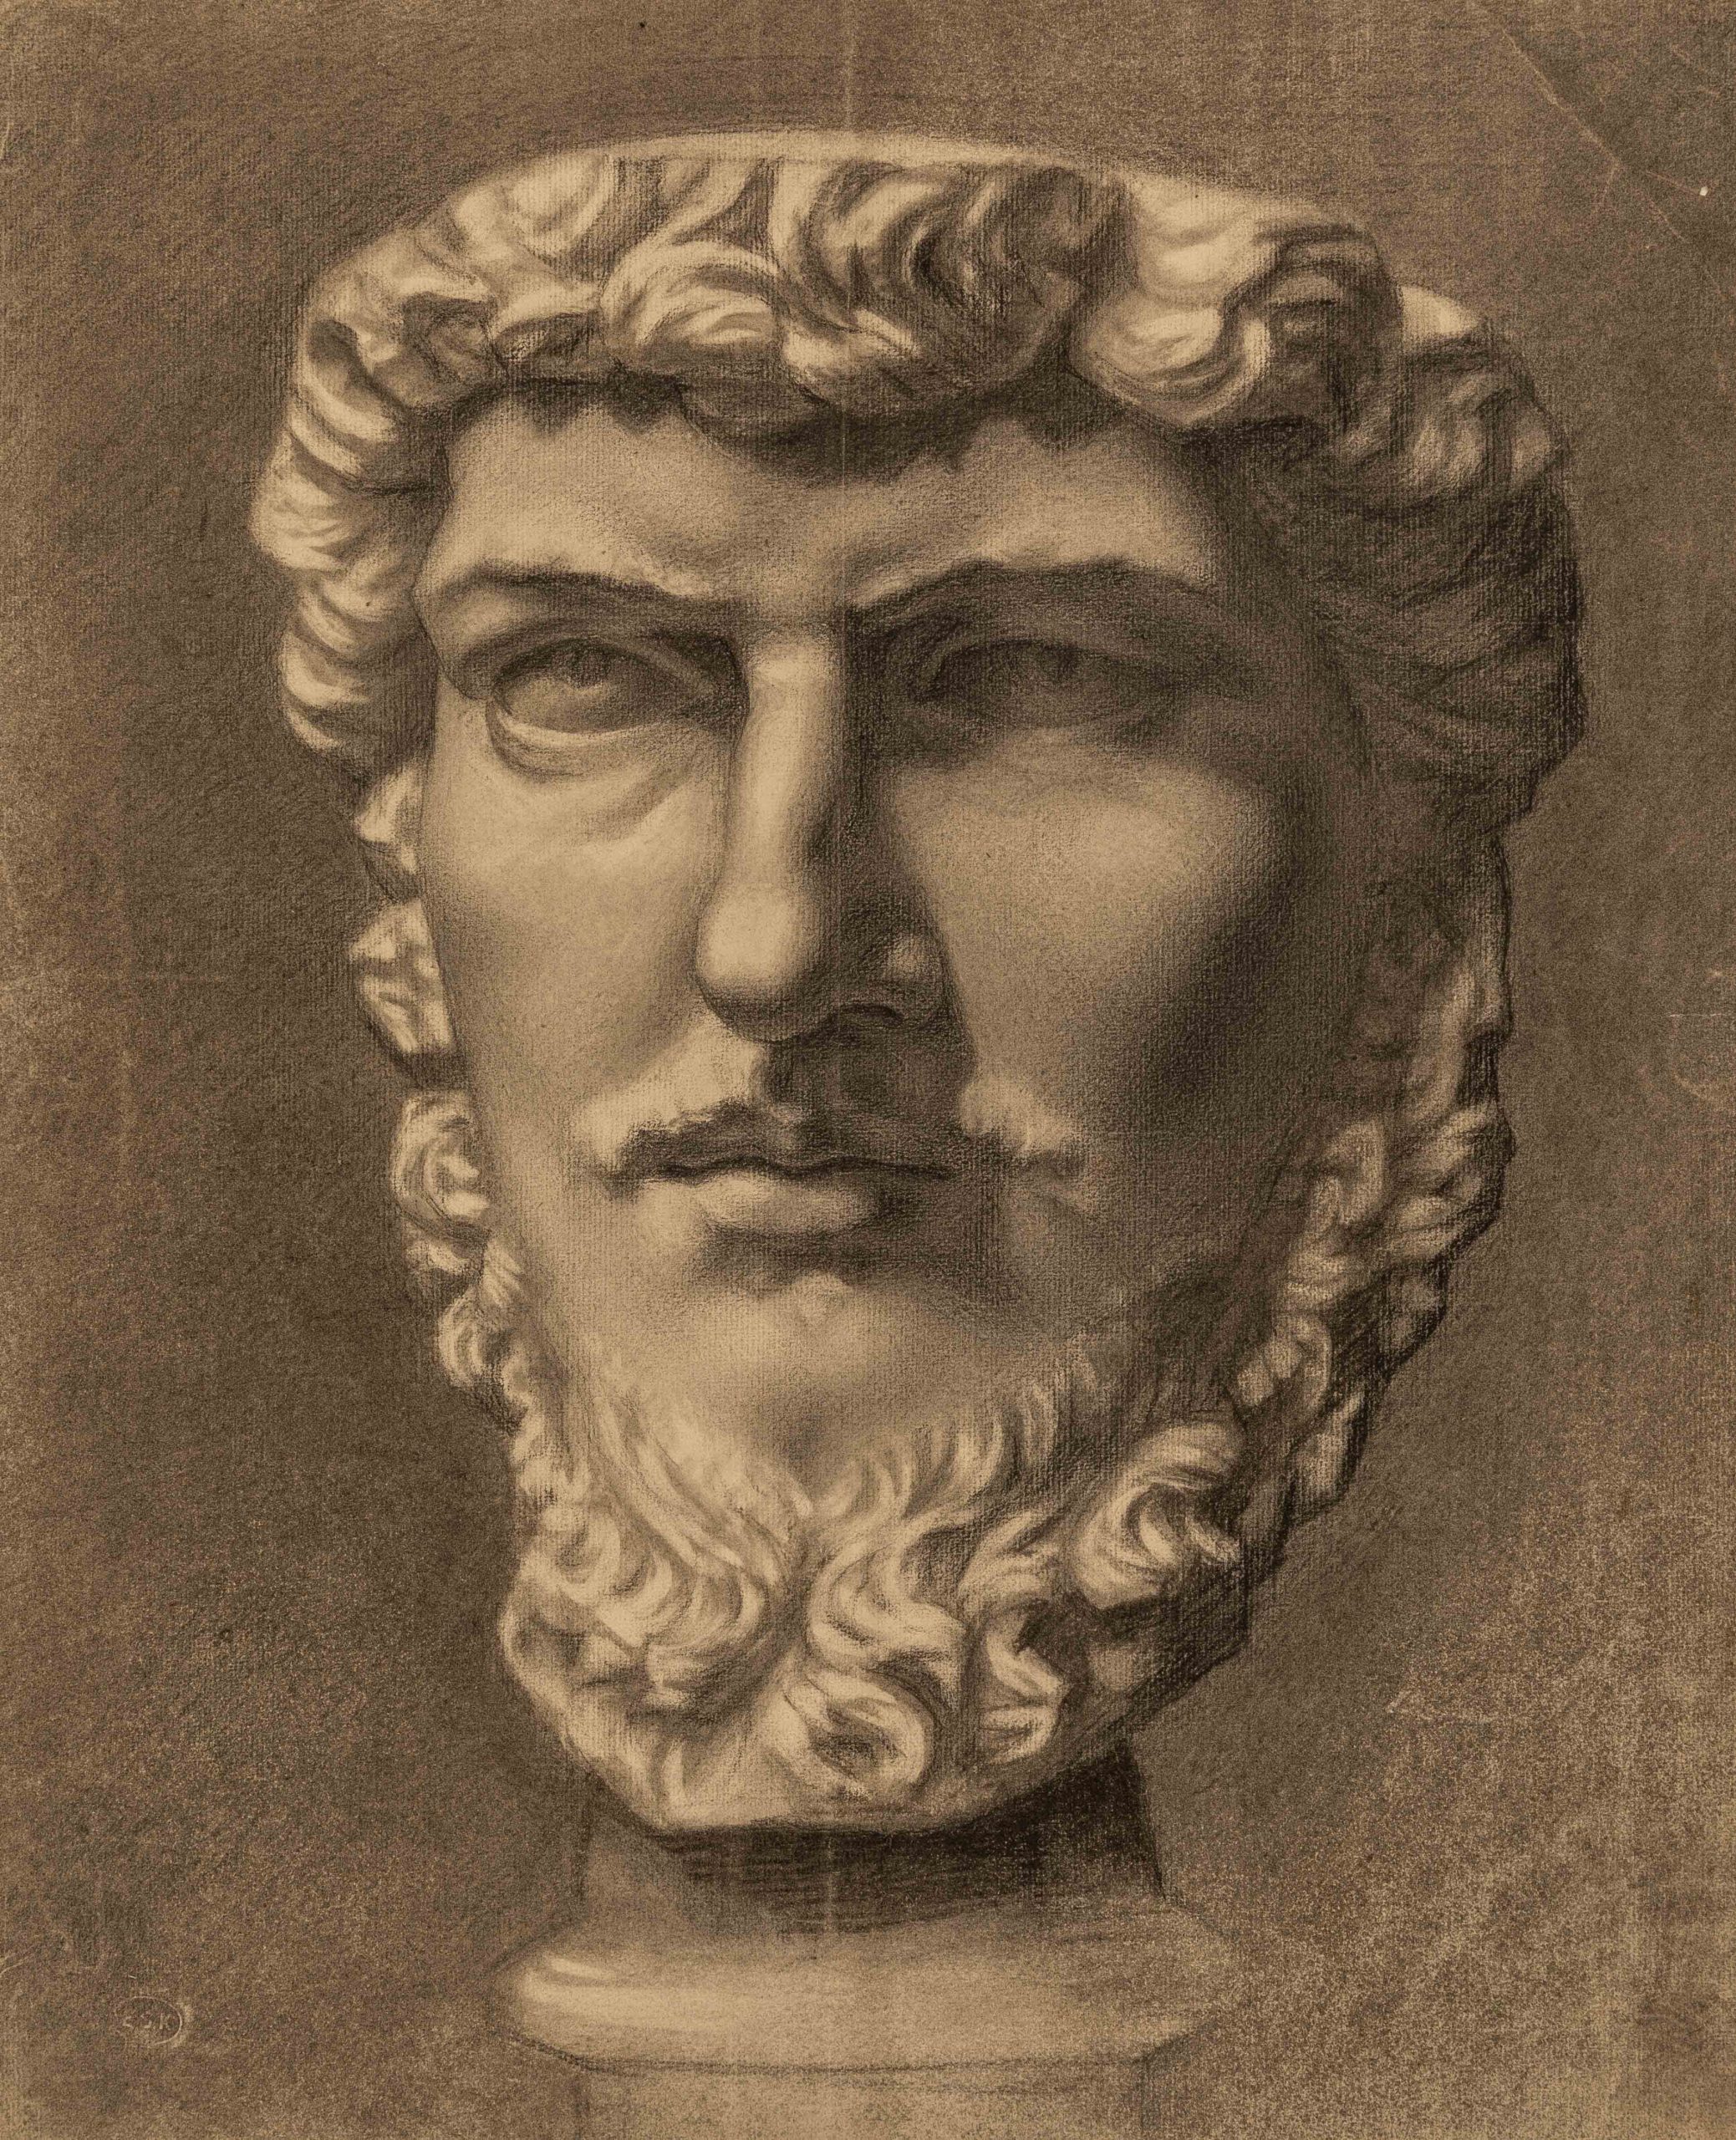 Study of a classical bust, probably depicting Lucius Verus